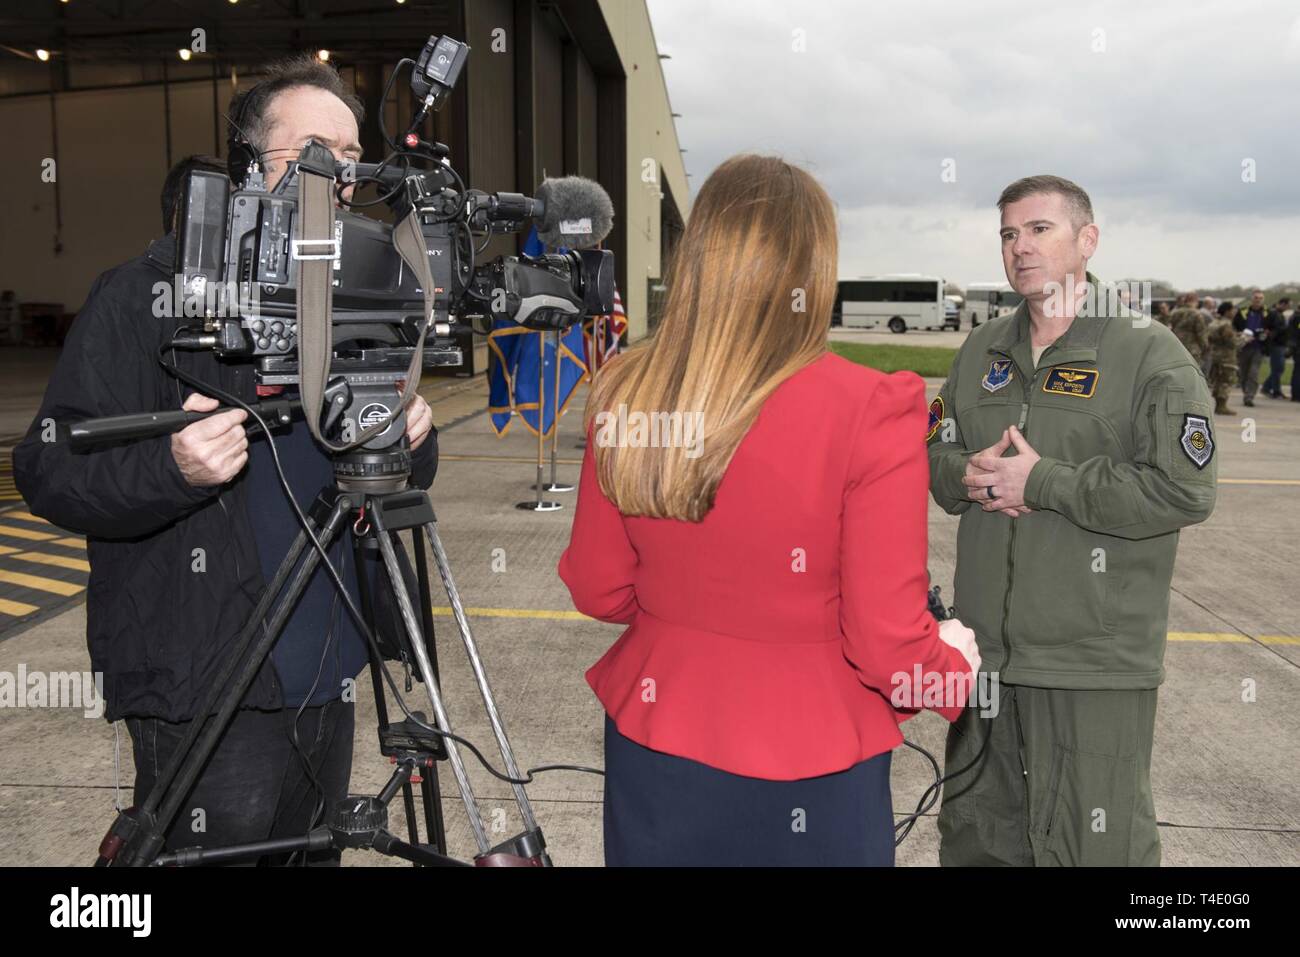 U.S. Air Force Lt. Col. Mike Esposito, Bomber Task Force in Europe commander, speaks with reporter during a press conference at RAF Fairford, March 19, 2019, regarding a Bomber Task Force Europe deployment. The contingent of B-52 aircraft, Airmen and support equipment are currently deployed from the 2nd Bomb Wing, Barksdale Air Force Base, La., to support the BTF. The deployment of strategic bombers to the U.K. helps exercise RAF Fairford as U.S. Air Forces in Europe - Air Forces Africa’s forward-operating location for bombers. The deployment includes joint and allied training to enhance inter Stock Photo